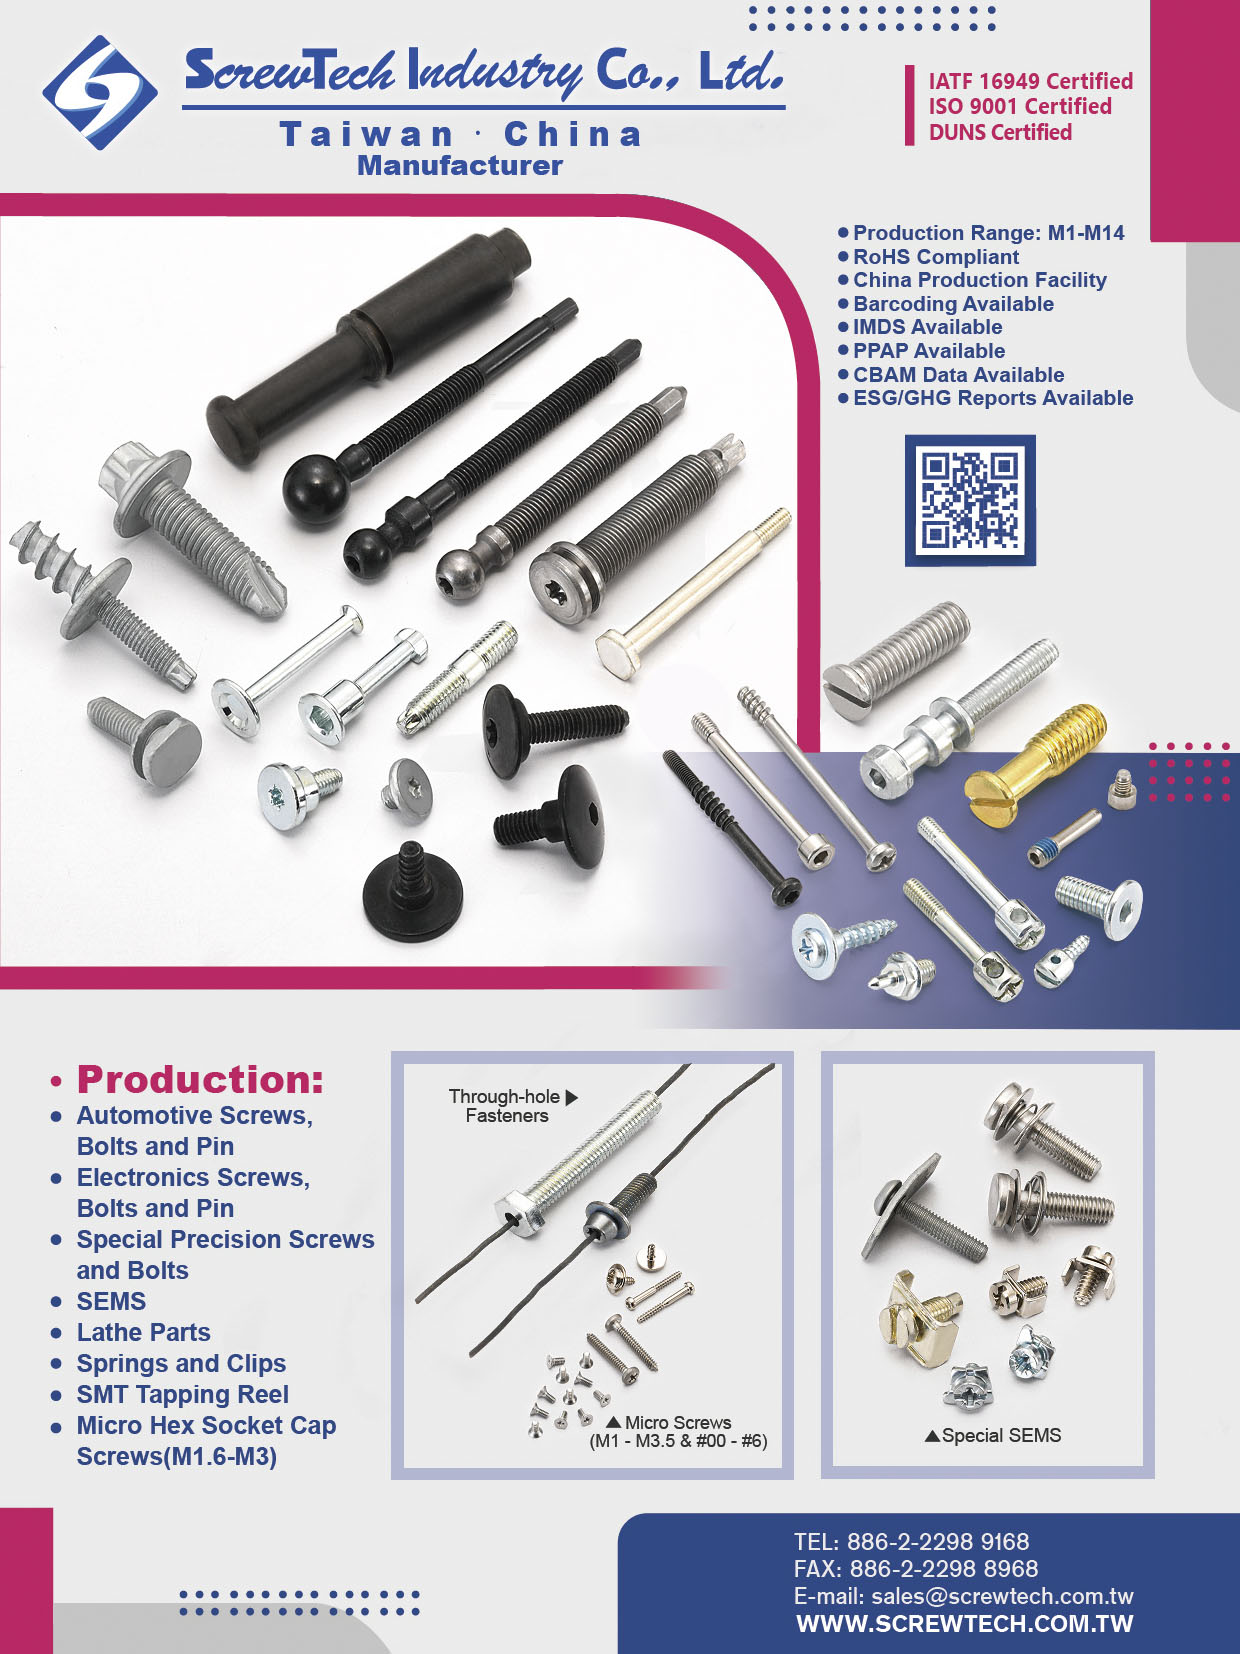 SCREWTECH INDUSTRY CO., LTD.  , Automotive Screws, Automotive Bolts, Automotive Pin, Electronic Screws, Electronic Bolts, Electronic Pin, Special Precision Screws, Special Precision Bolts, SEMS, Lathe Parts, Springs and Clips, SMT Tapping Reel